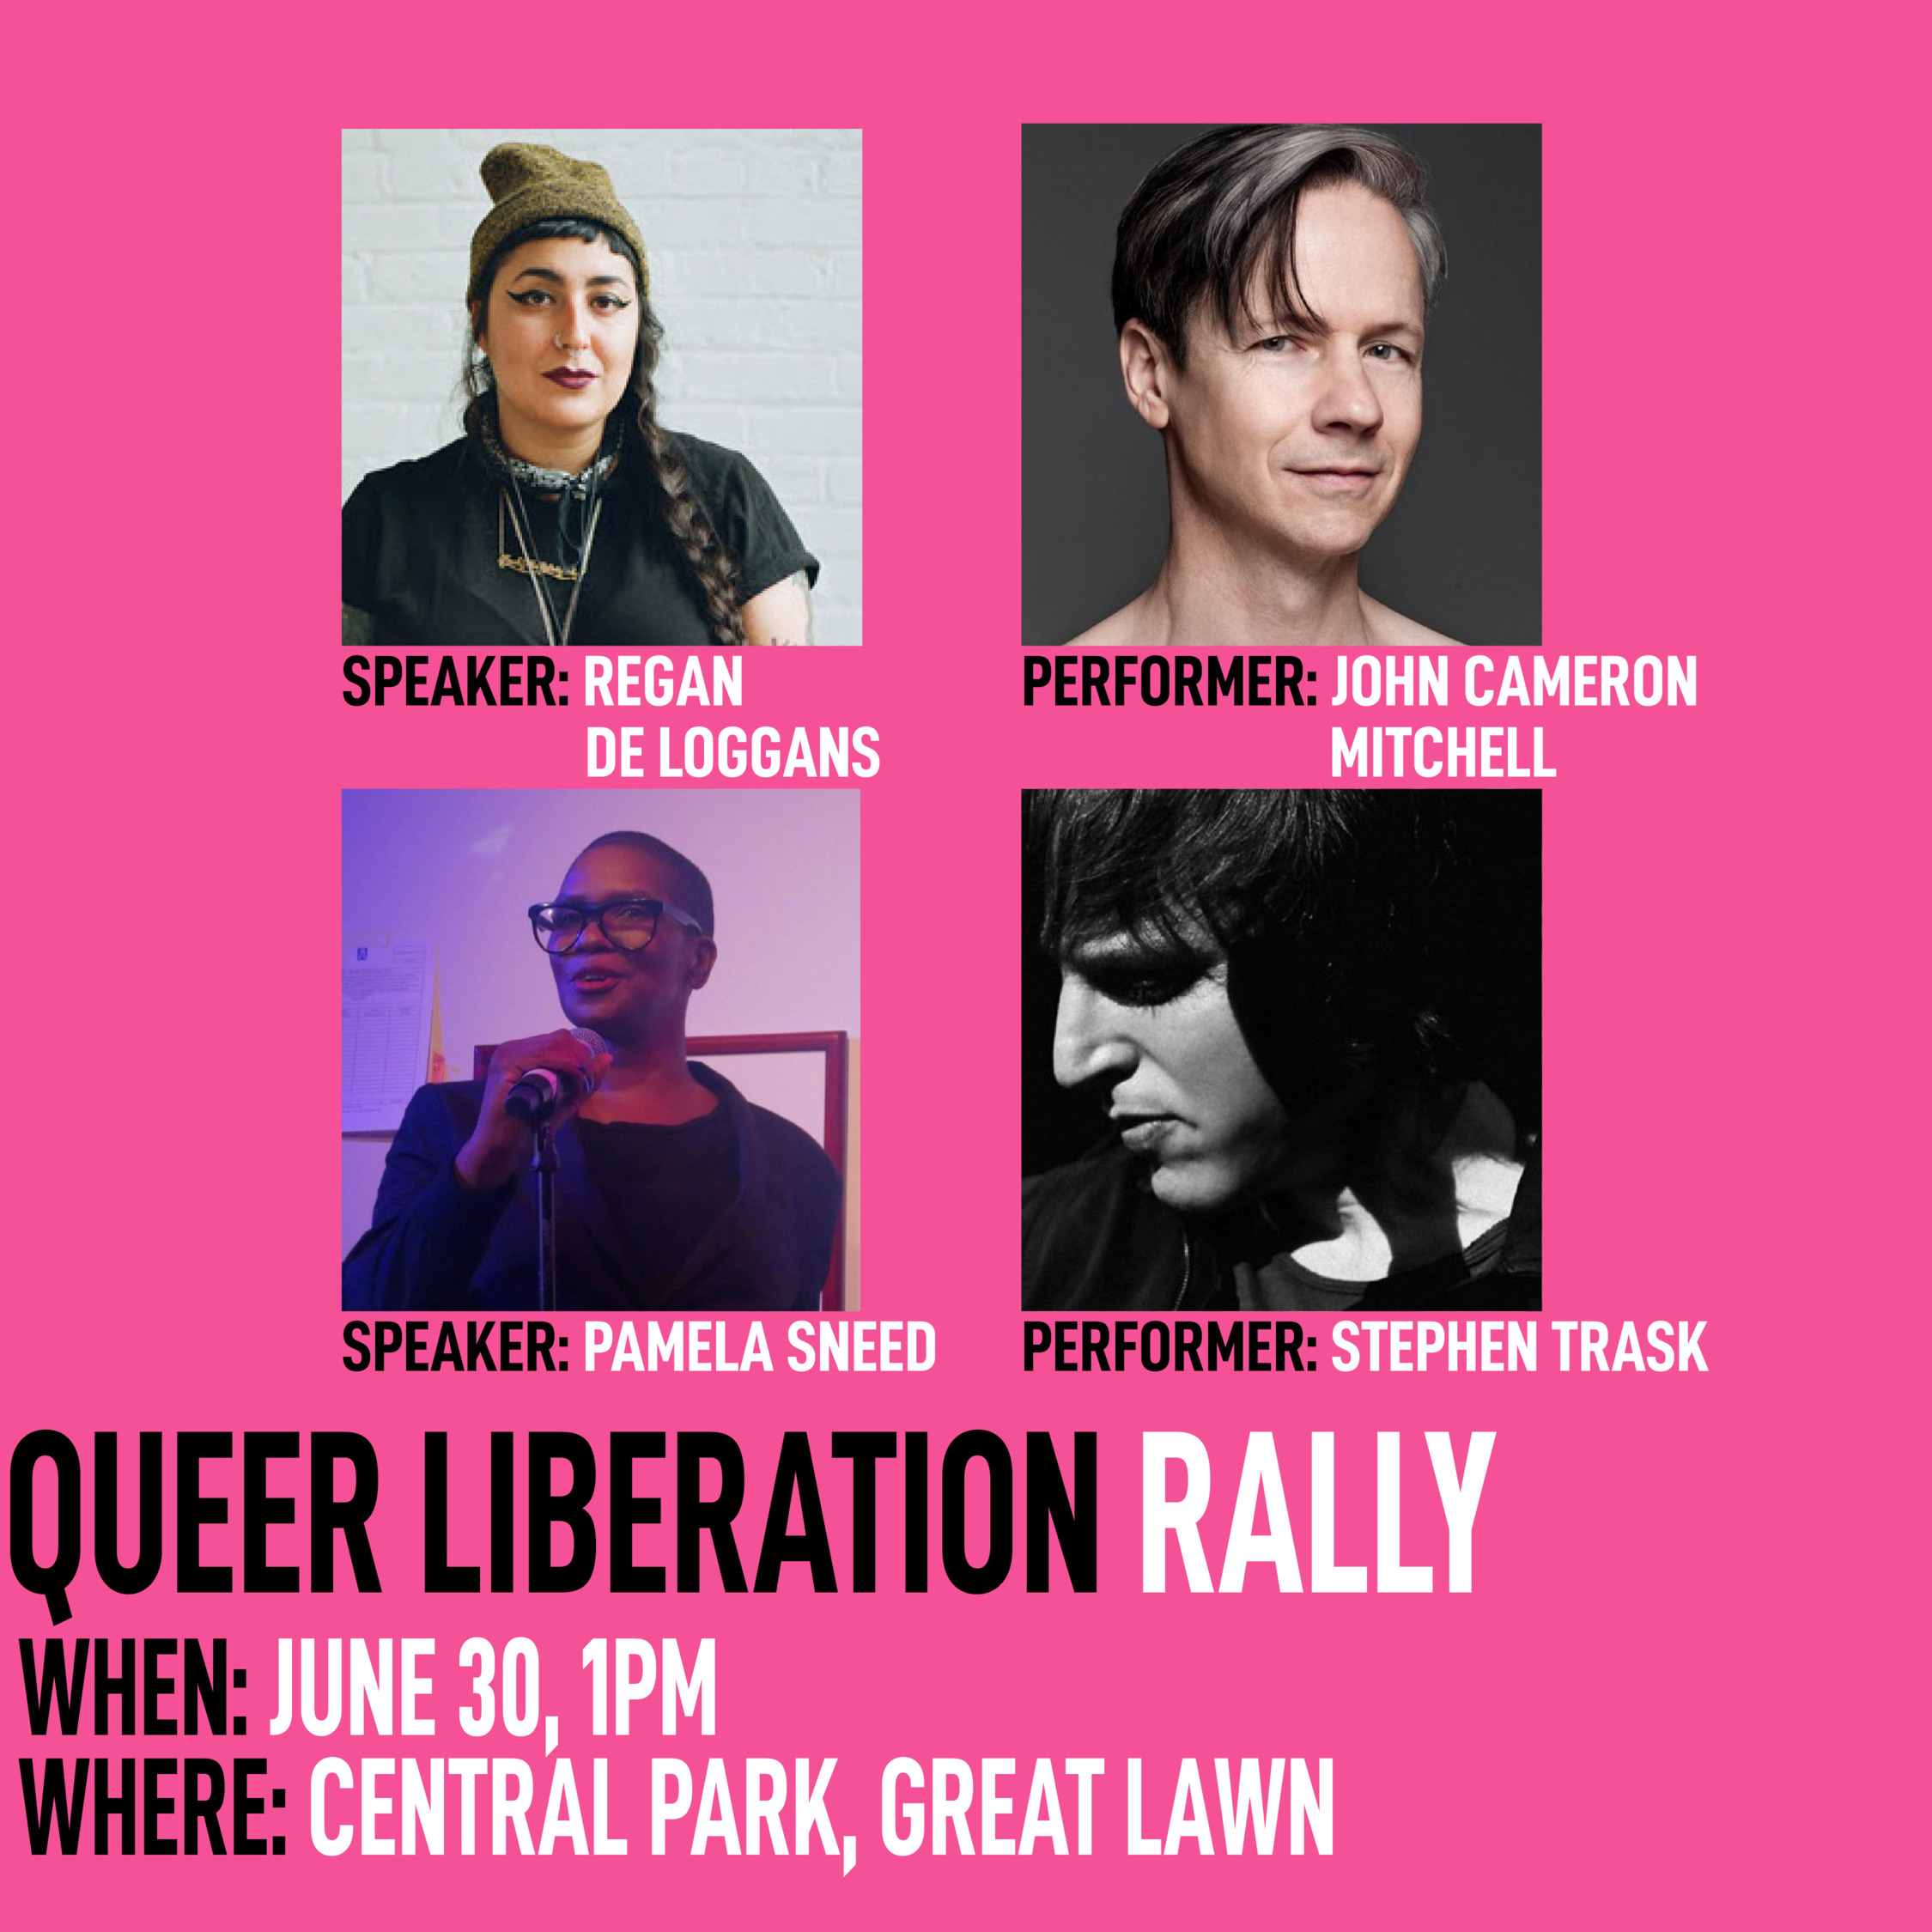 [RPC] Queer Liberation Rally Speakers 4 Square4.jpg